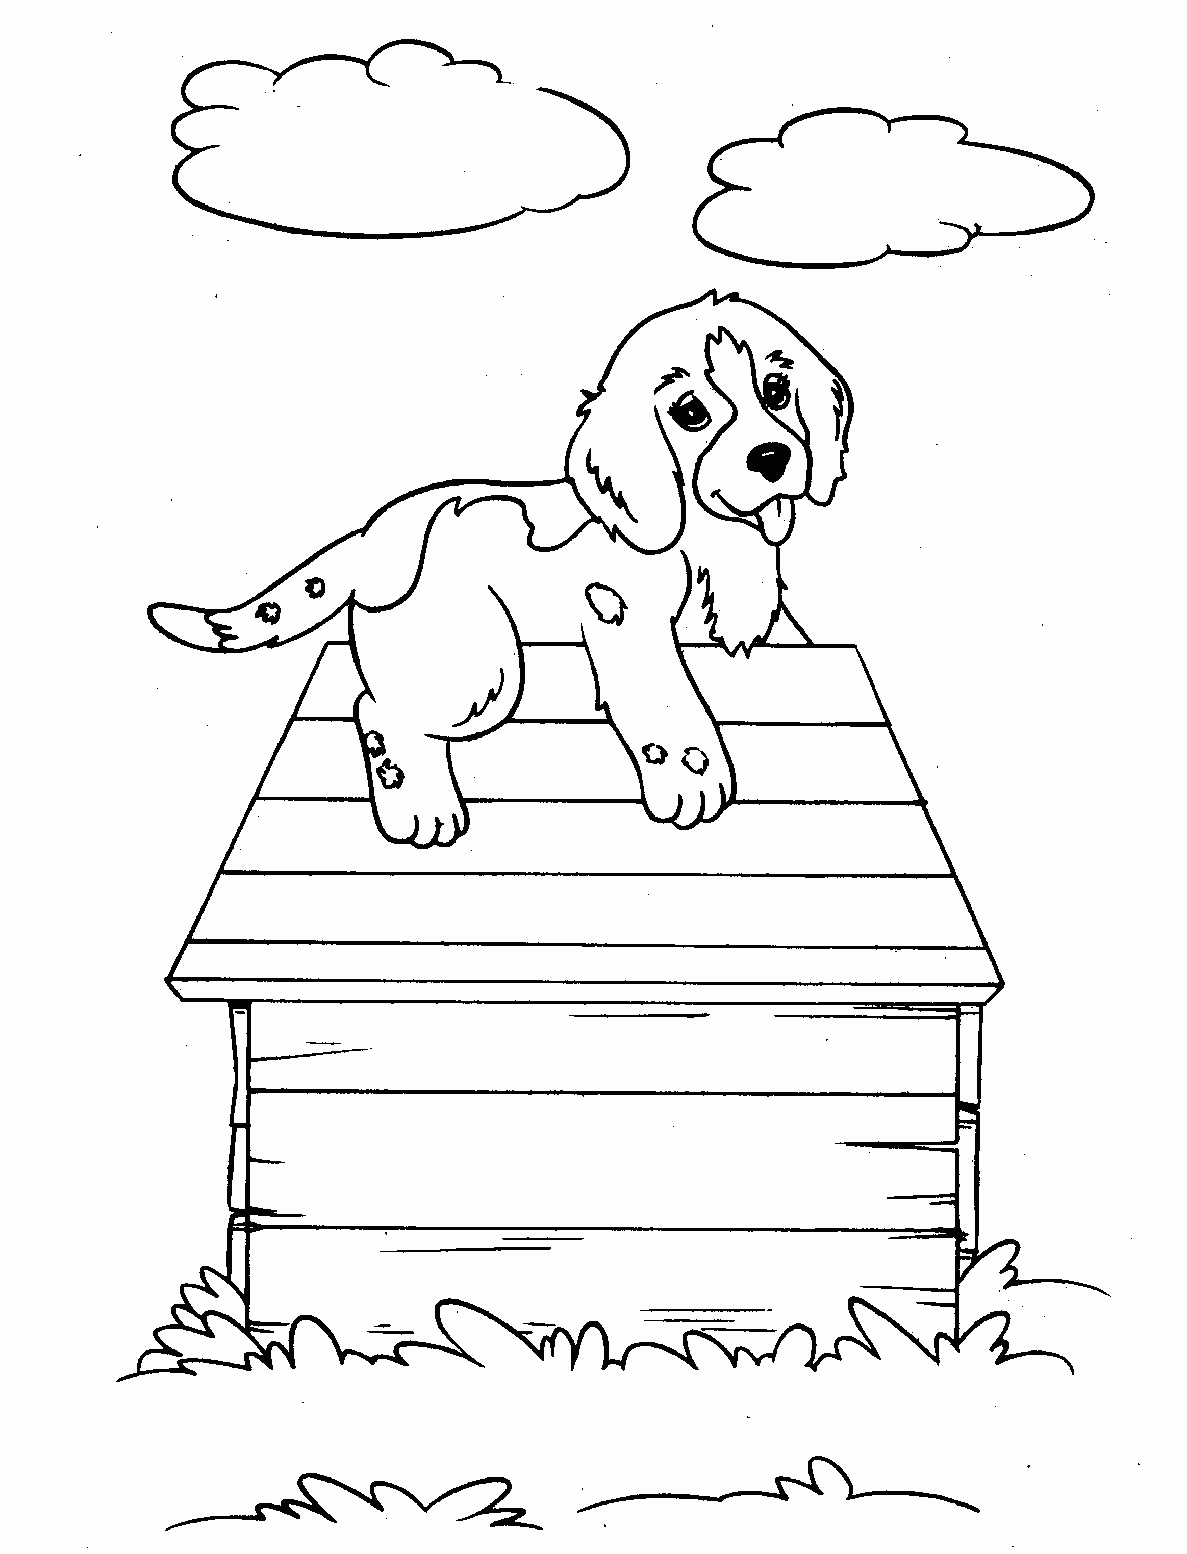 Free Printable Dog Coloring Pages For Kids - Colouring Pages Dogs Free Printable